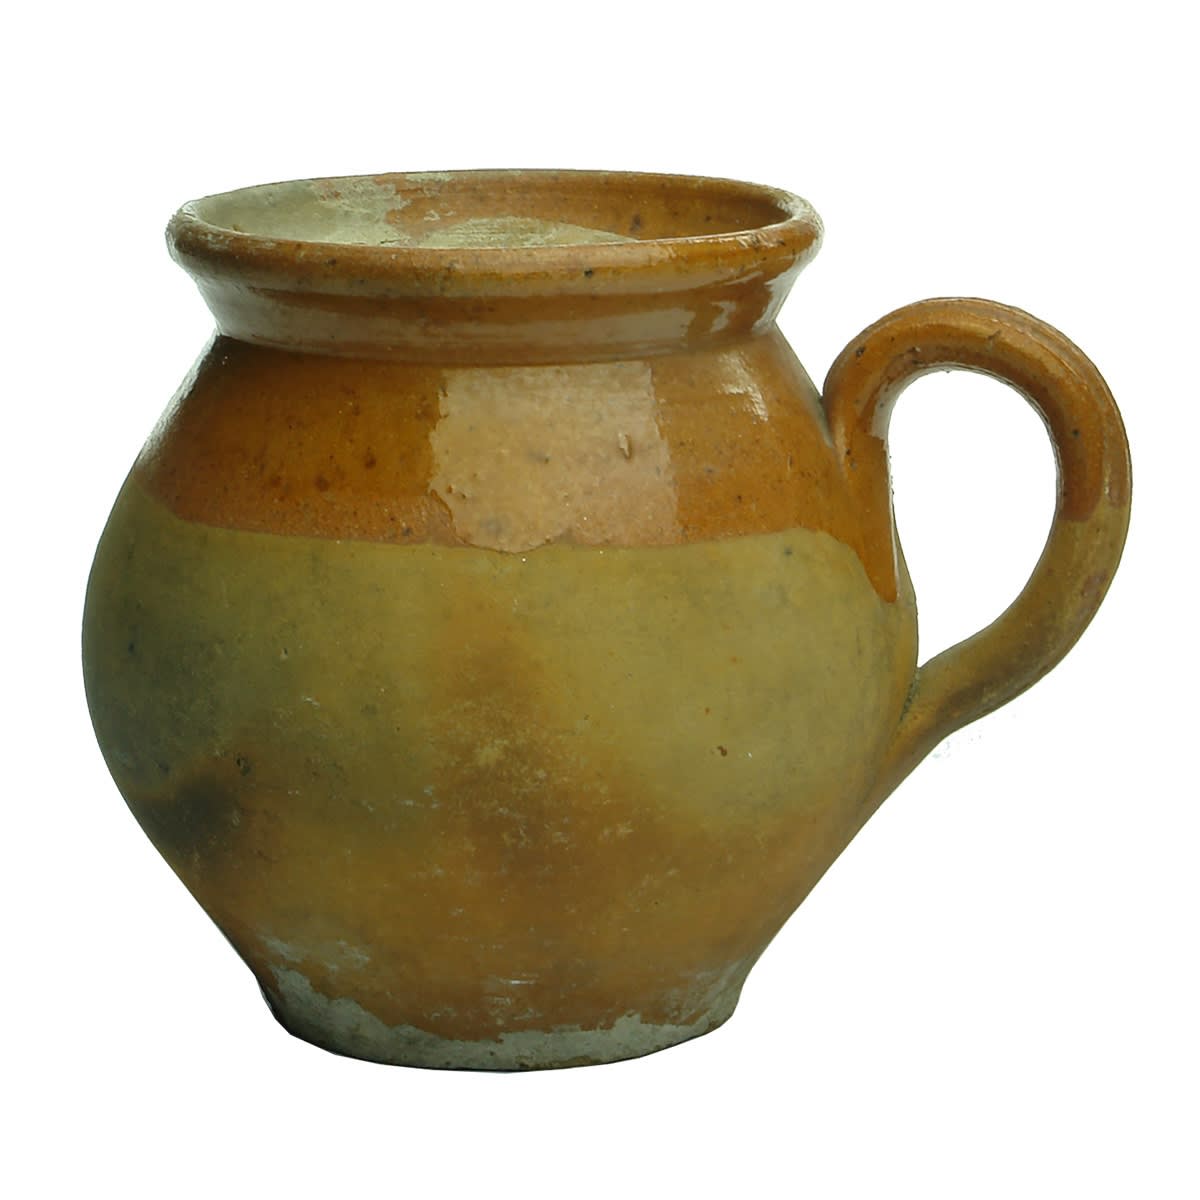 Early looking redware type pottery mug. Glazed upper handle rim and body.